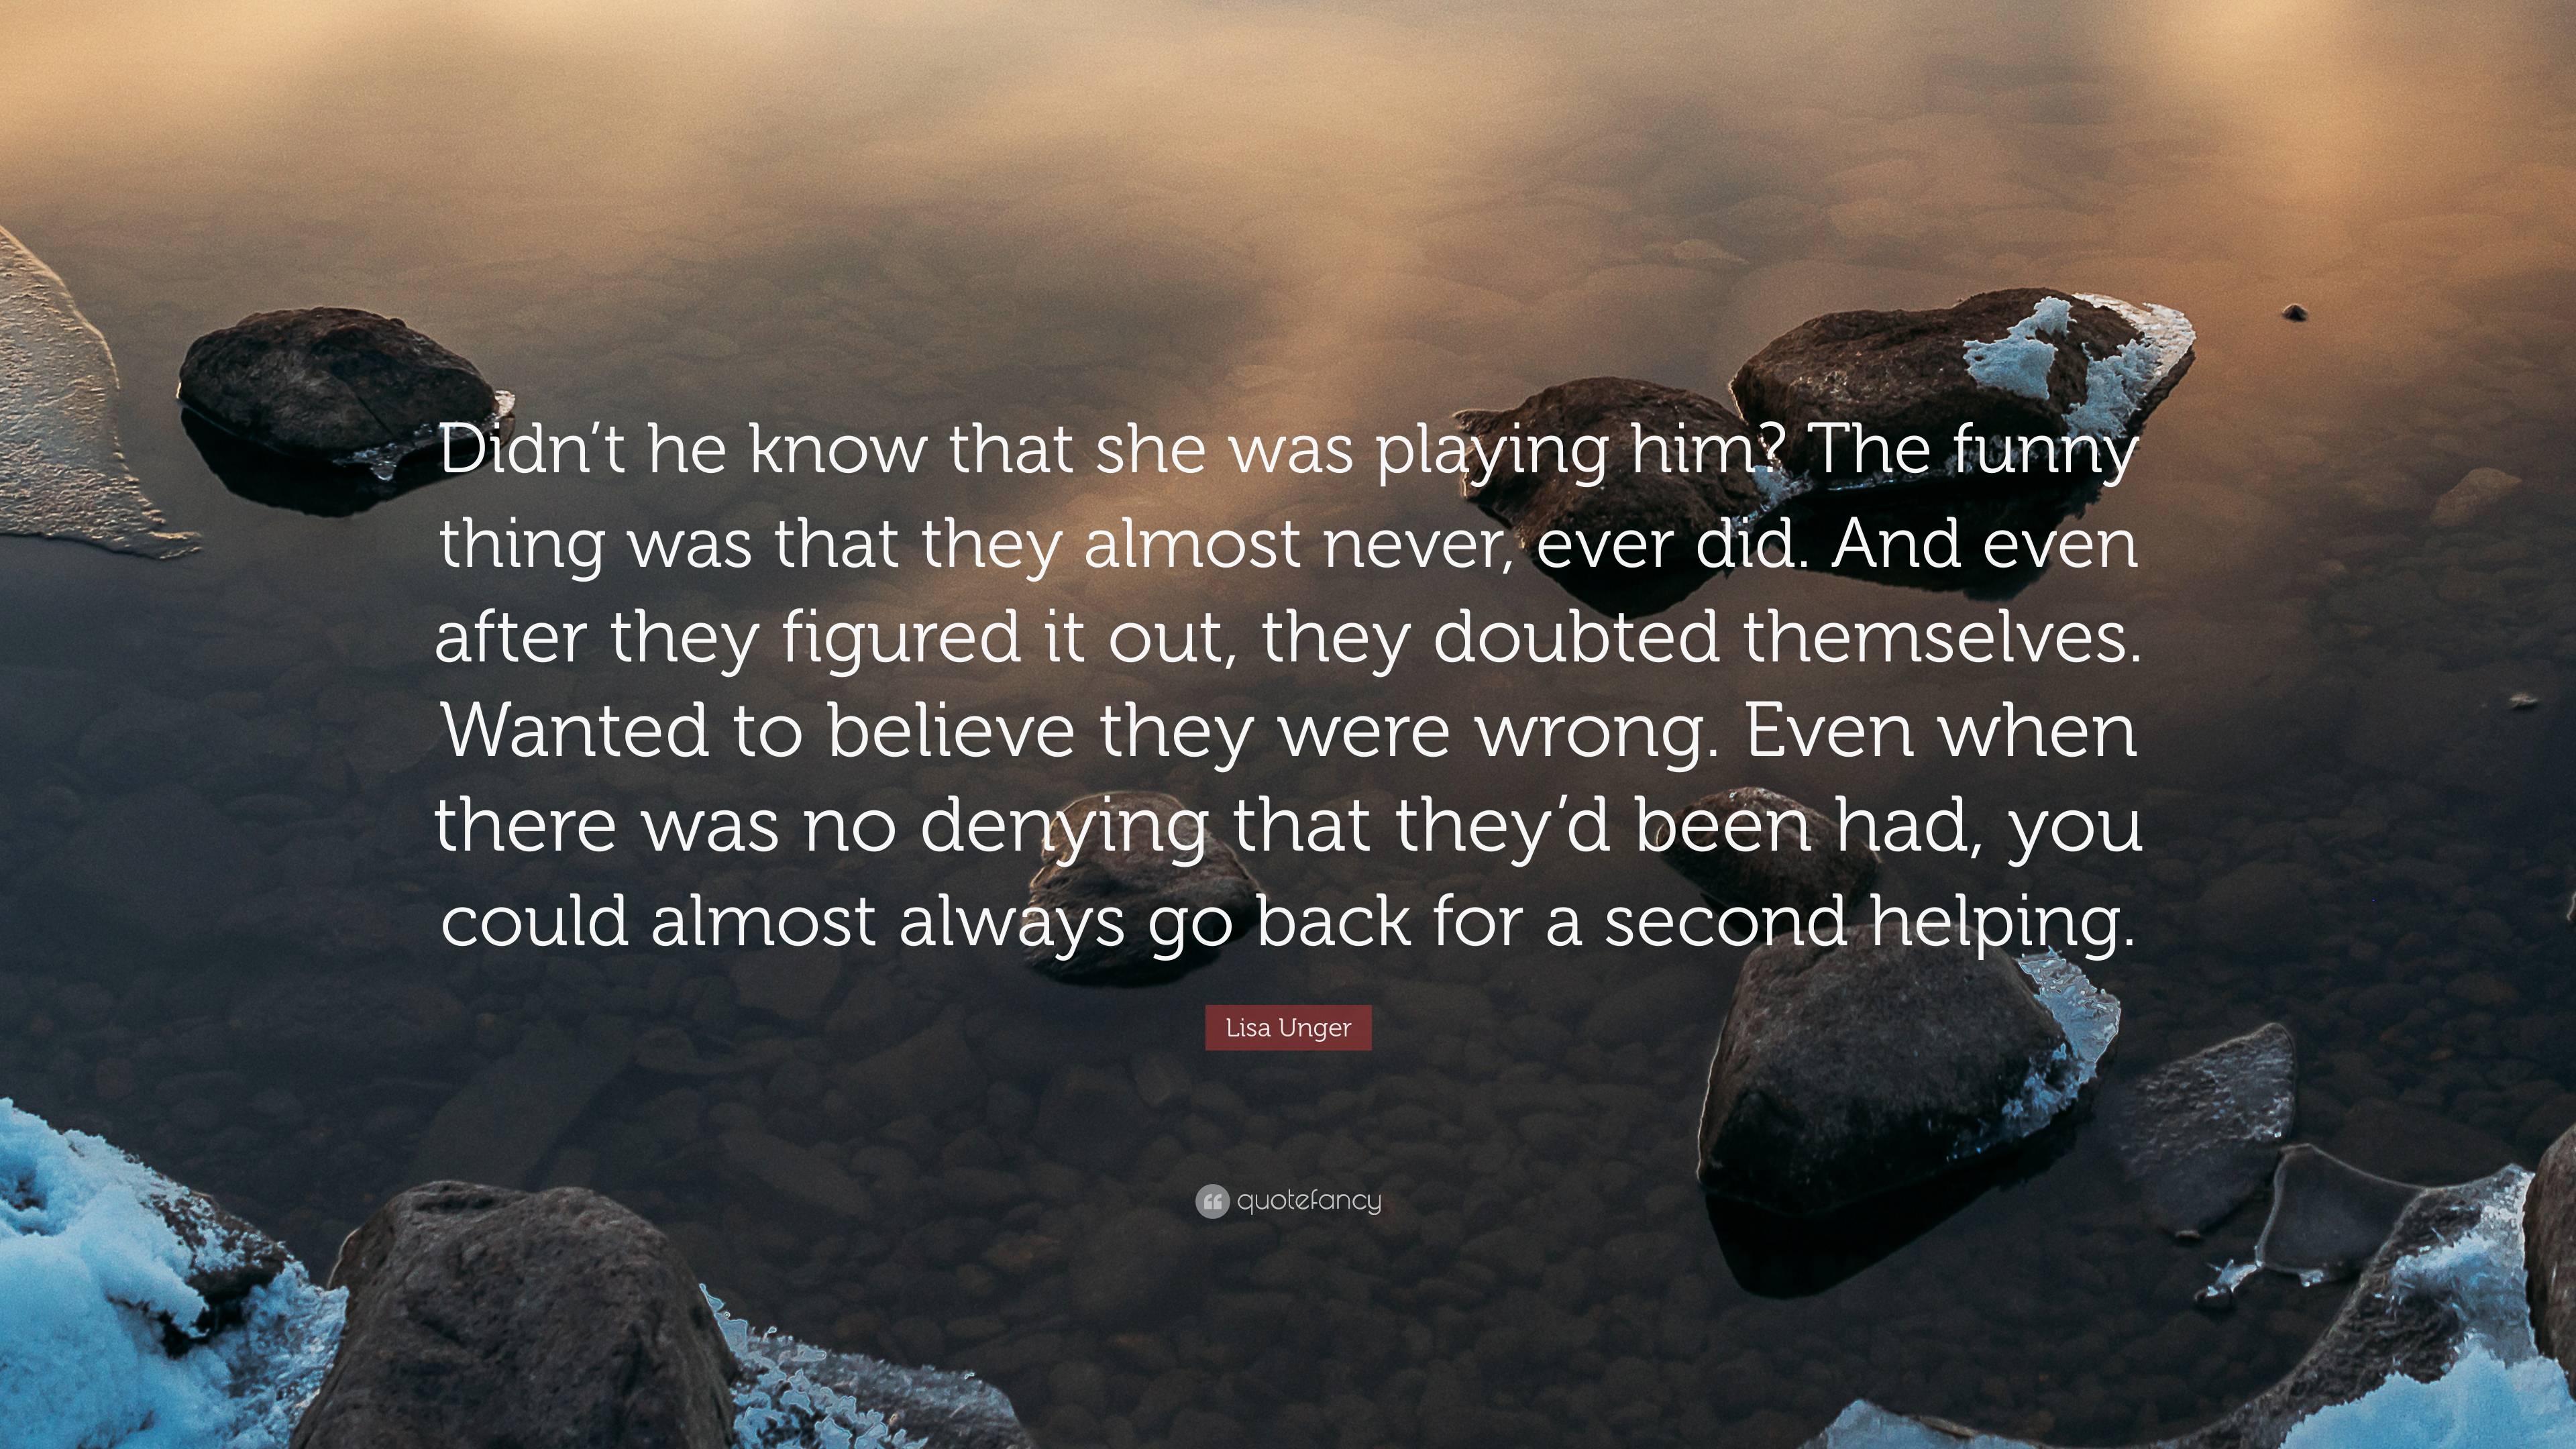 Lisa Unger Quote: “Didn't he know that she was playing him? The funny thing  was that they almost never, ever did. And even after they figur...”